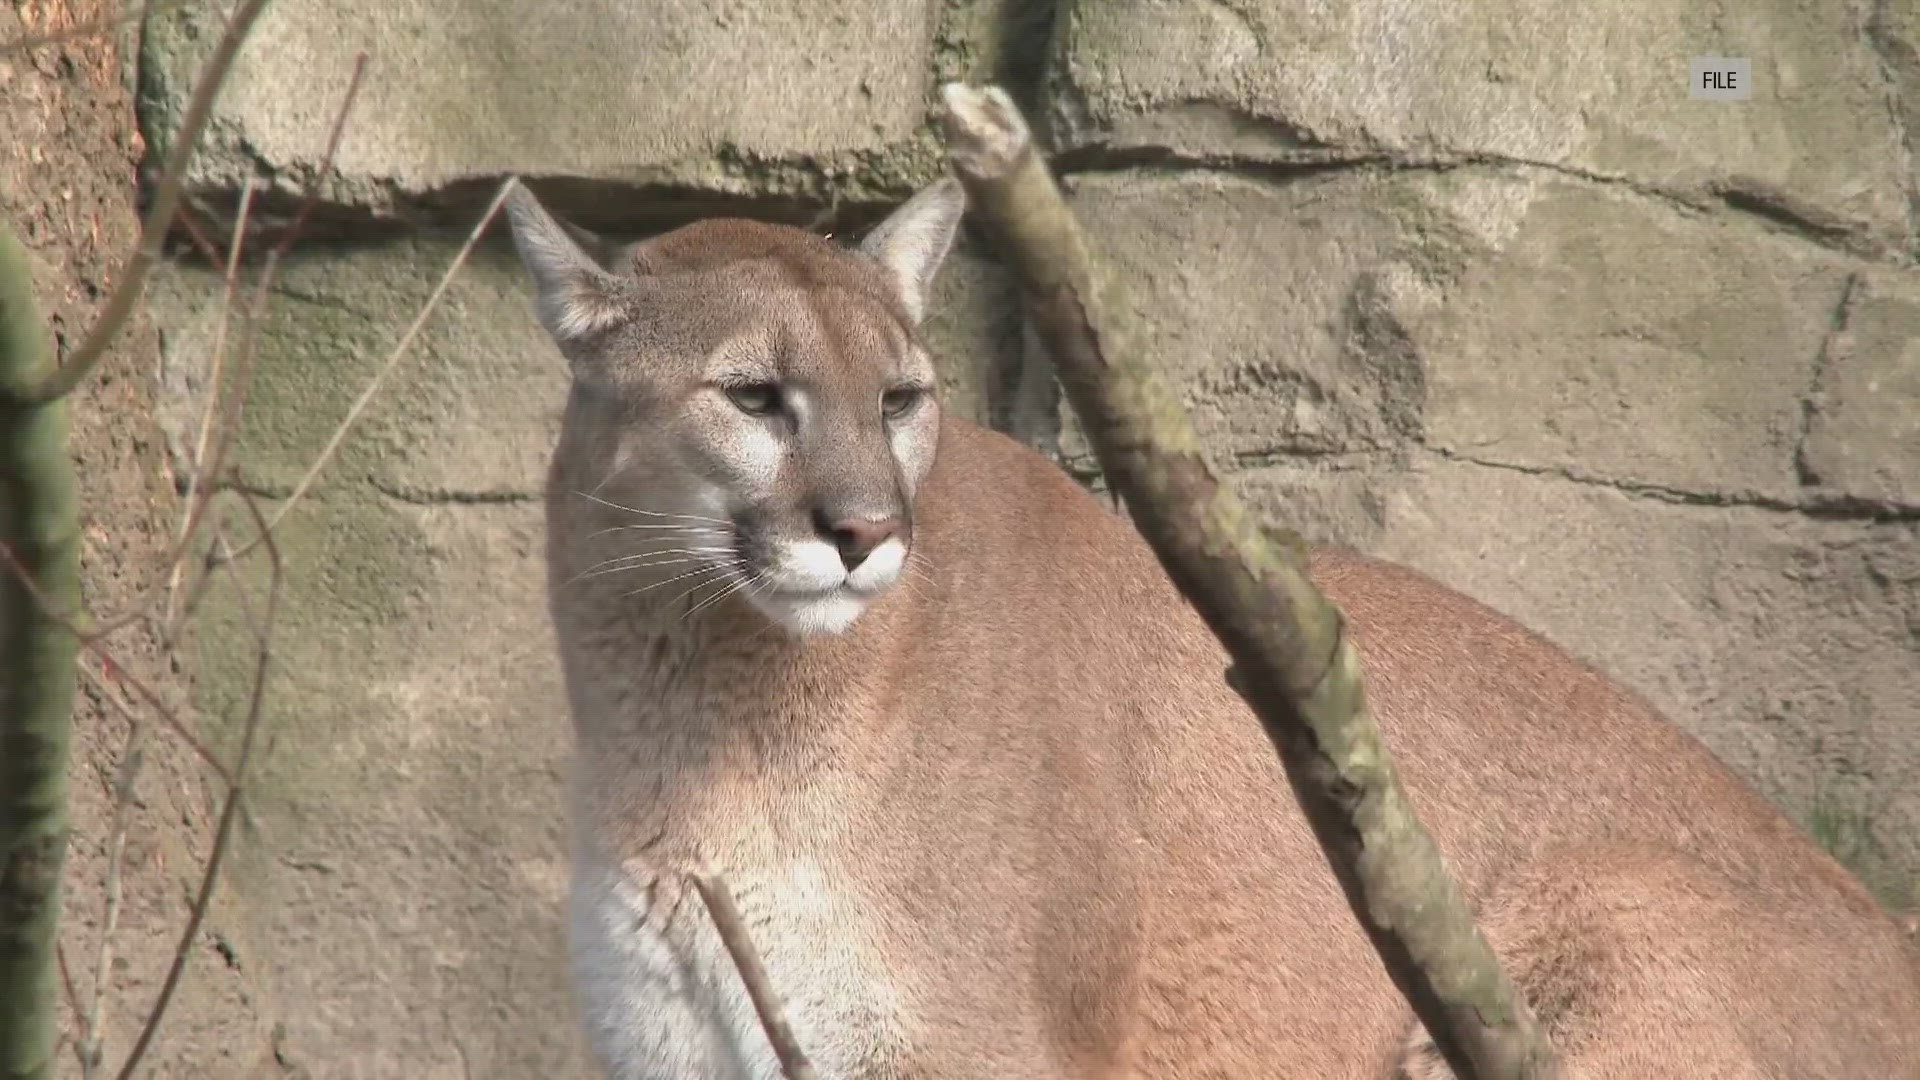 The California Department of Fish and Wildlife euthanized the mountain lion in the attack and said the surviving teen is expected to make a full recovery.